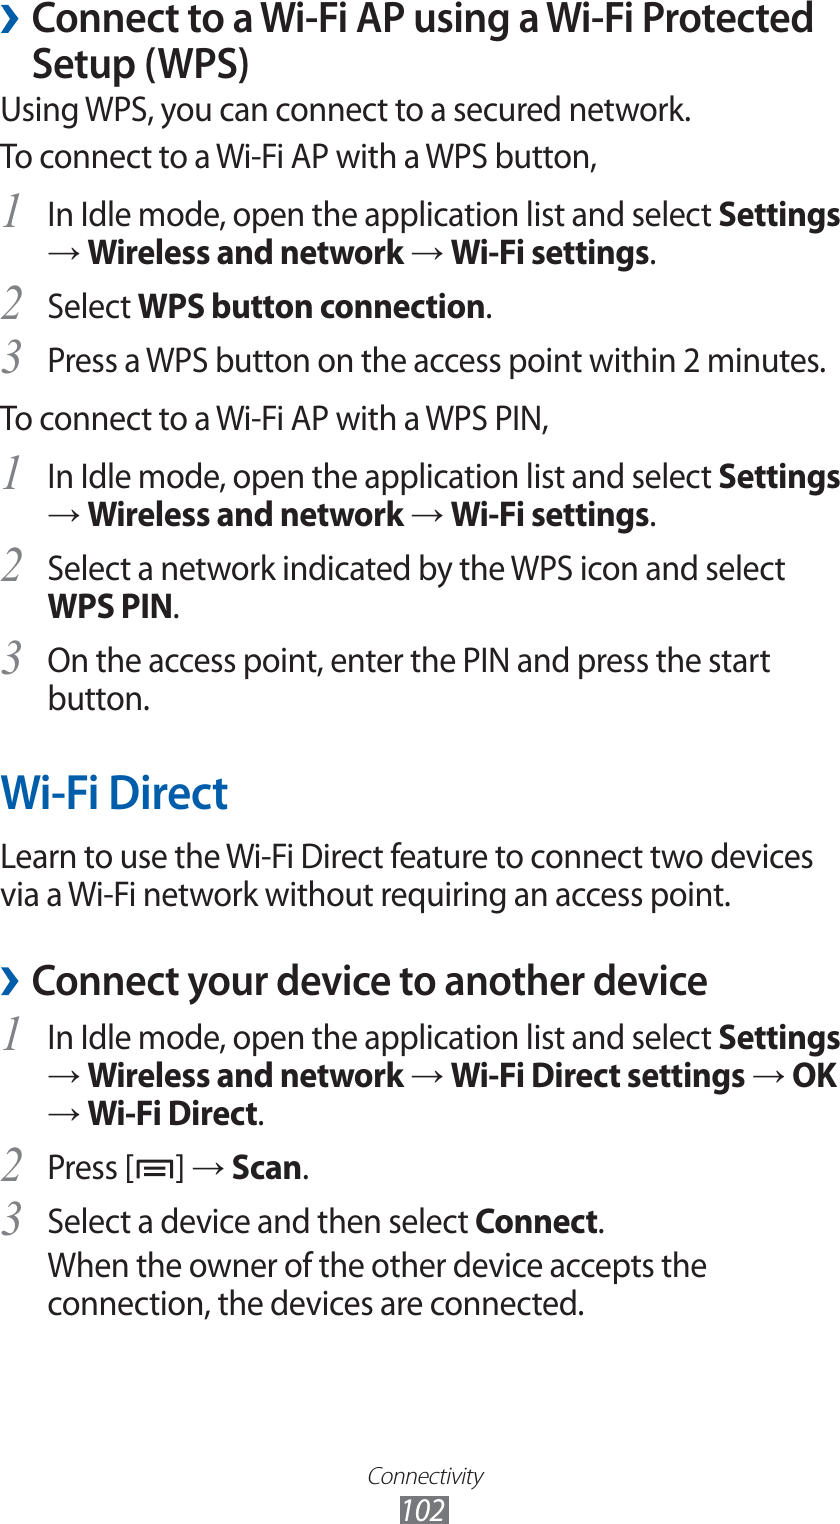 Connectivity102Connect to a Wi-Fi AP using a Wi-Fi Protected  ›Setup (WPS)Using WPS, you can connect to a secured network.To connect to a Wi-Fi AP with a WPS button,In Idle mode, open the application list and select 1 Settings → Wireless and network → Wi-Fi settings.Select 2 WPS button connection.Press a WPS button on the access point within 2 minutes.3 To connect to a Wi-Fi AP with a WPS PIN,In Idle mode, open the application list and select 1 Settings → Wireless and network → Wi-Fi settings.Select a network indicated by the WPS icon and select 2 WPS PIN.On the access point, enter the PIN and press the start 3 button.Wi-Fi DirectLearn to use the Wi-Fi Direct feature to connect two devices via a Wi-Fi network without requiring an access point.Connect your device to another device ›In Idle mode, open the application list and select 1 Settings → Wireless and network → Wi-Fi Direct settings → OK → Wi-Fi Direct.Press [2 ] → Scan.Select a device and then select 3 Connect.When the owner of the other device accepts the connection, the devices are connected.